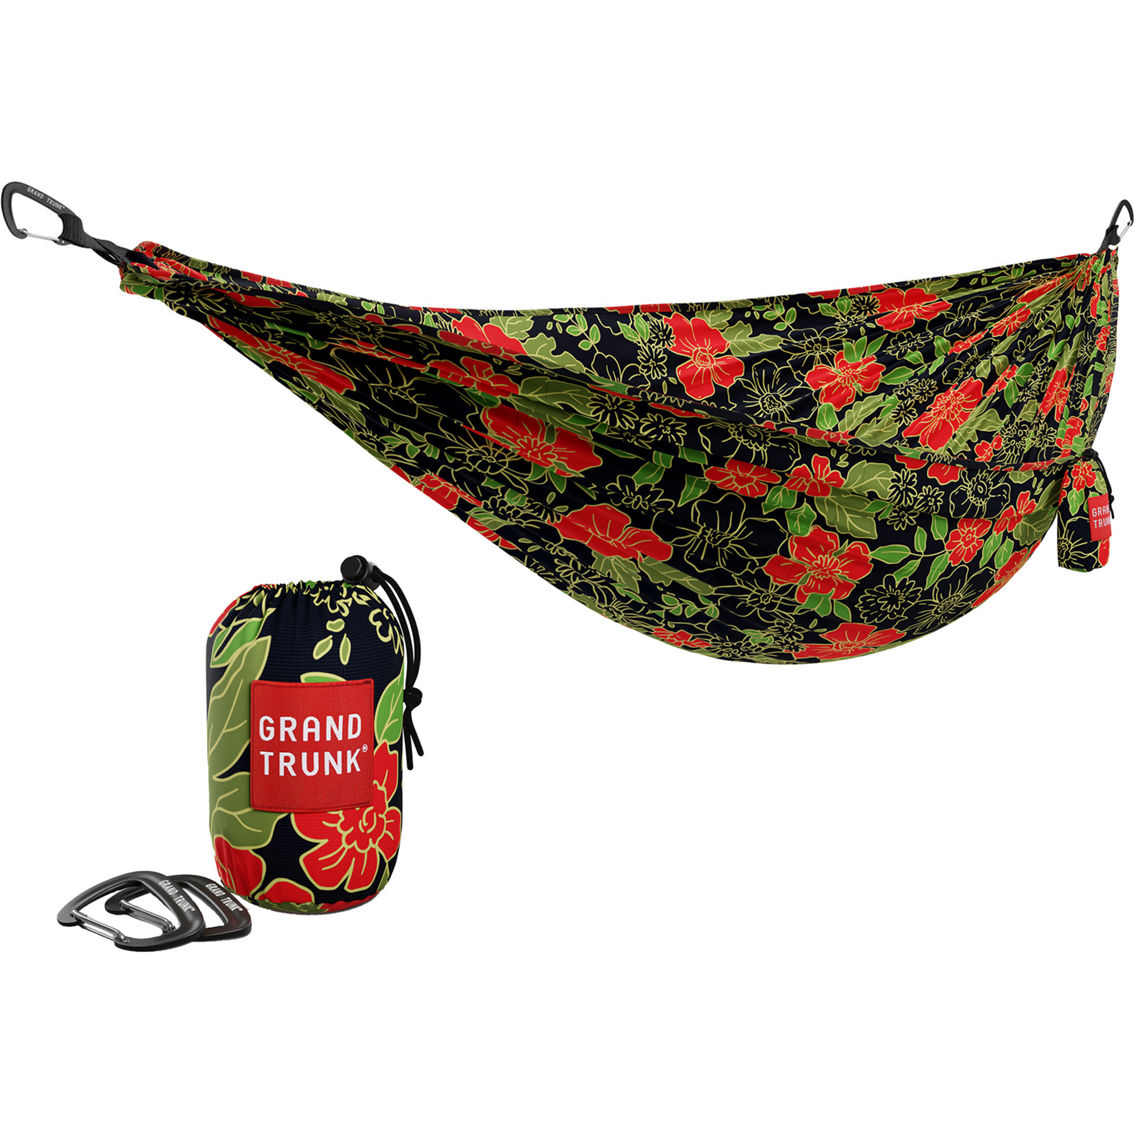 Grand Trunk TrunkTech Printed Double Hammock - Image 1 of 3